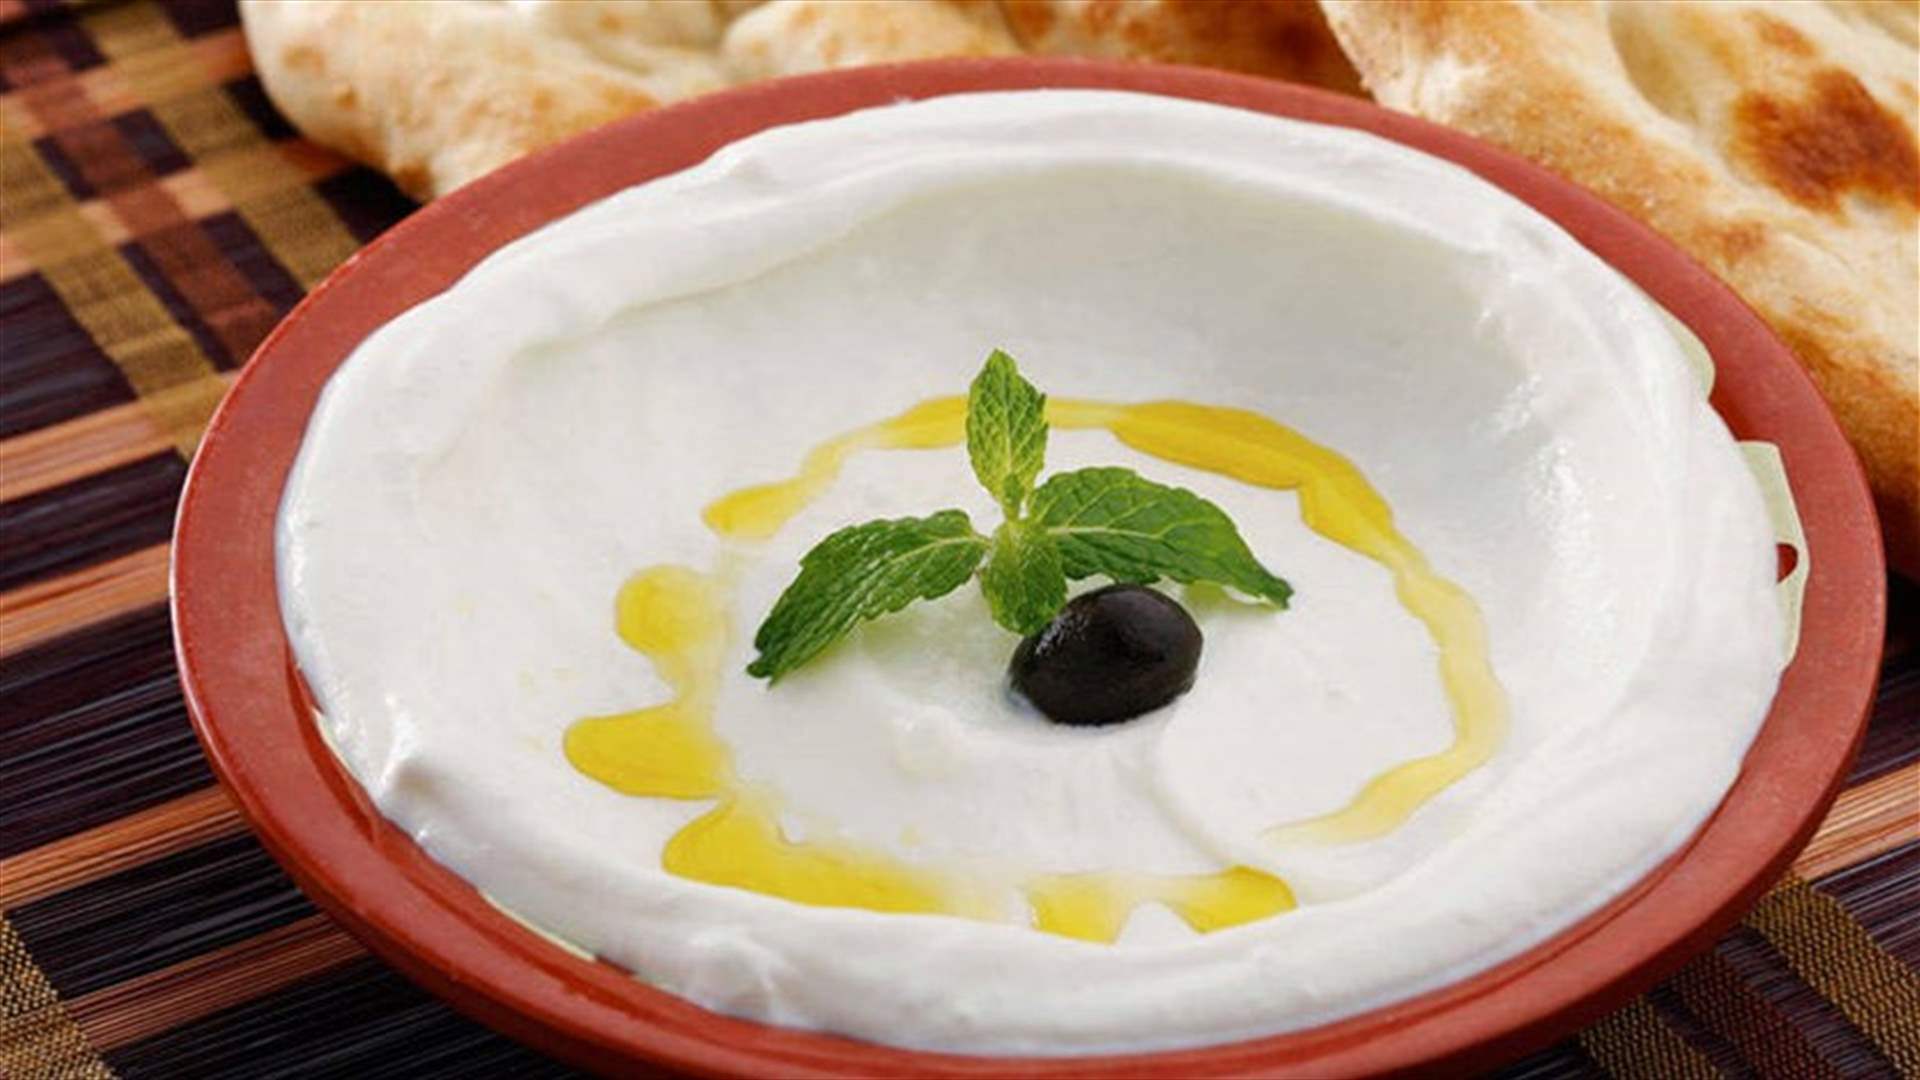 Labneh crisis exposed: Inside the investigation of the dairy production factories in Lebanon